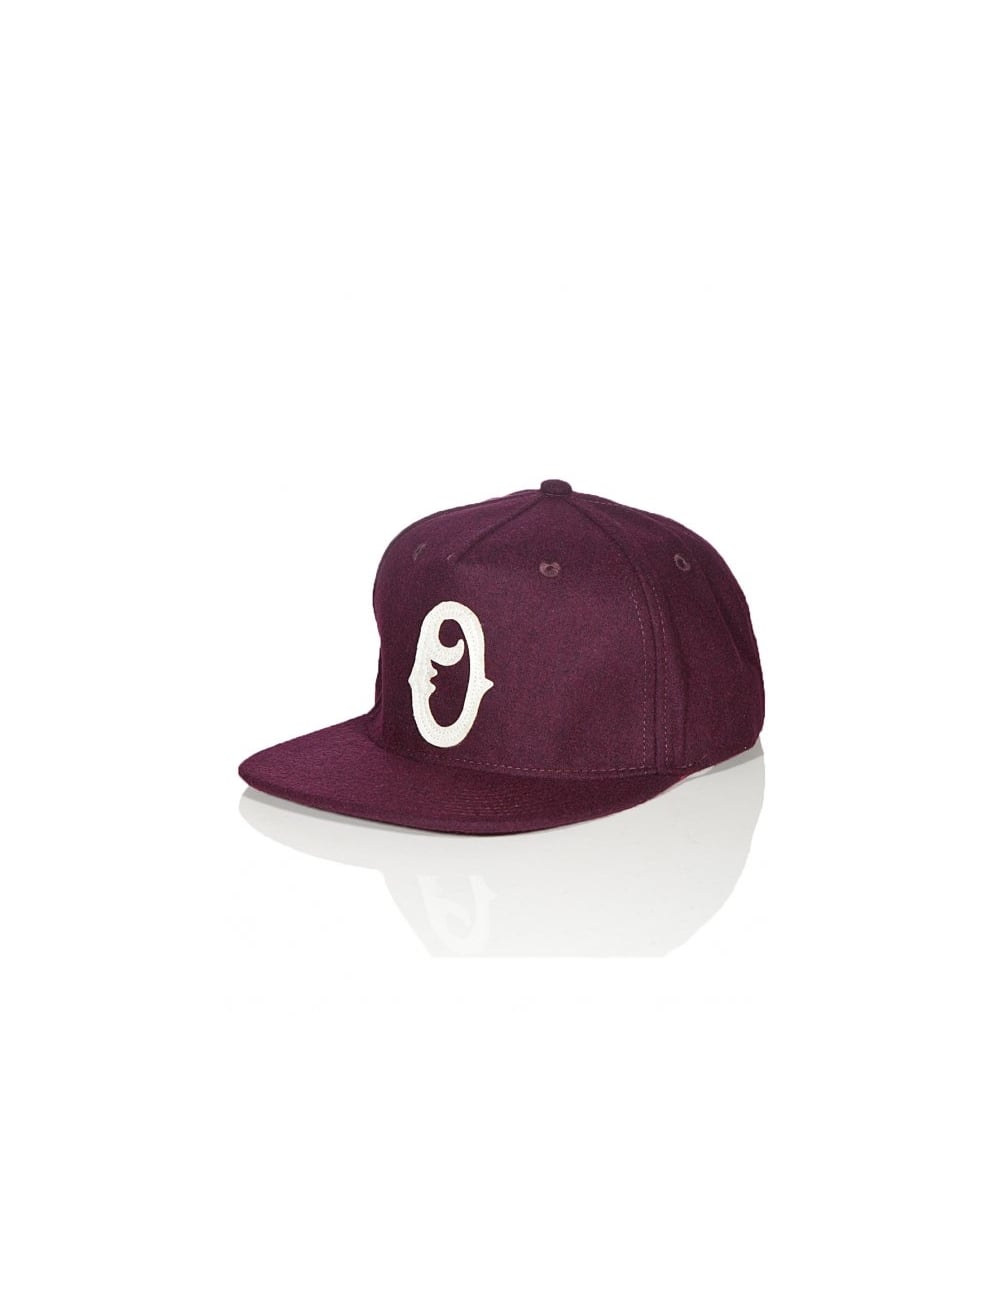 OBEY Clothing Old Logo - Obey Clothing Old Timers Snapback - Burgundy - Obey Clothing from ...